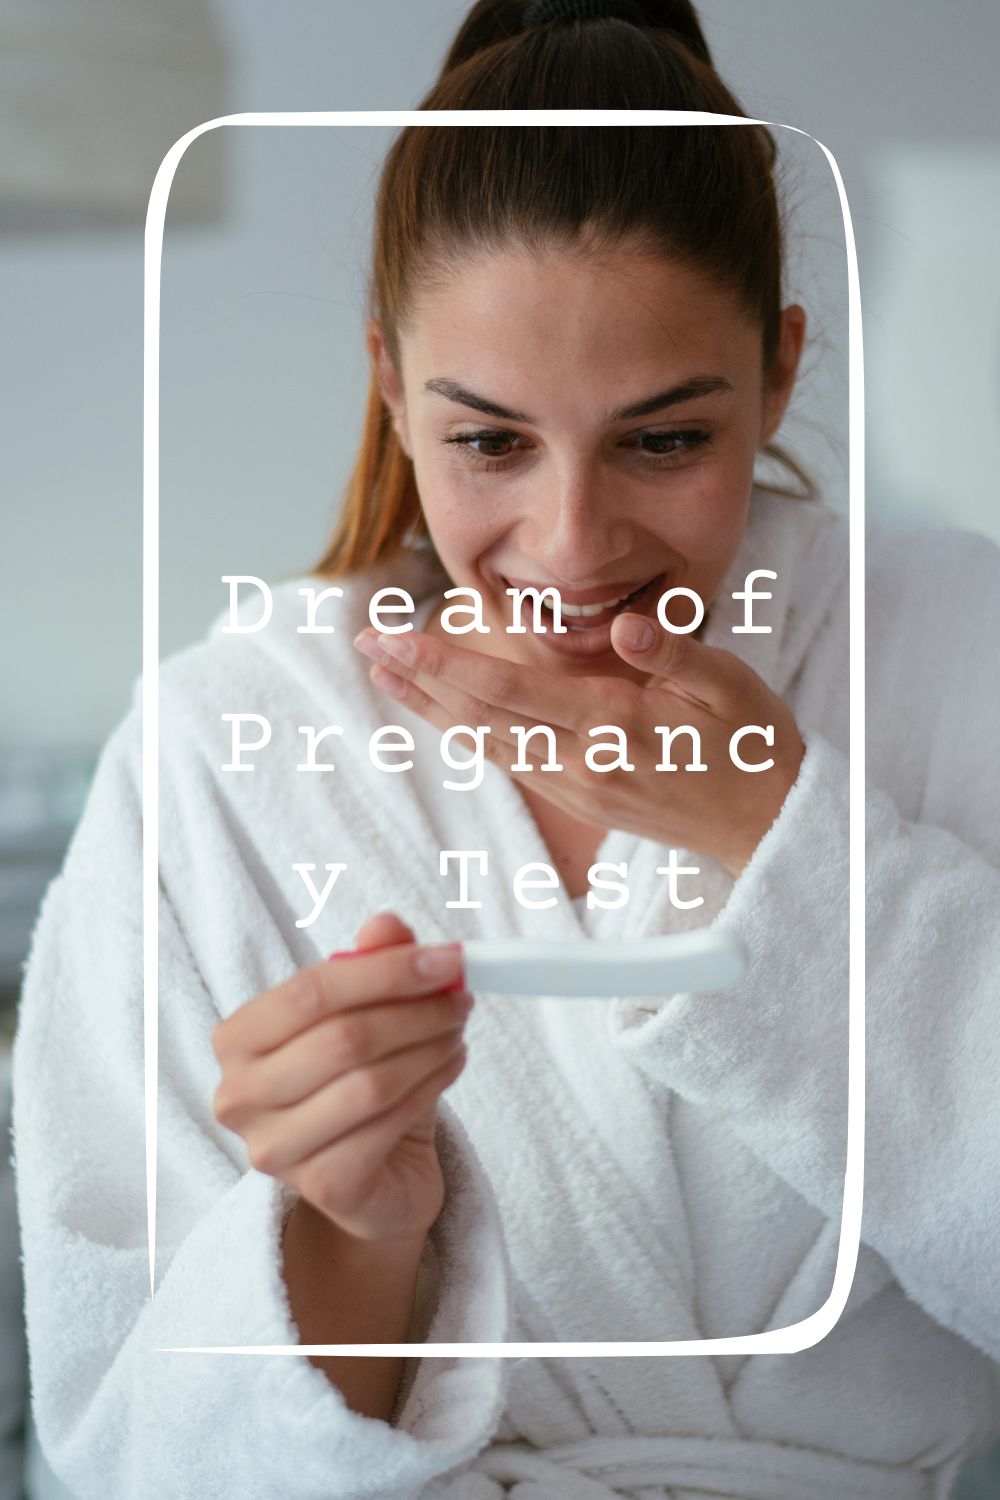 15 Dream of Pregnancy Test Meanings4